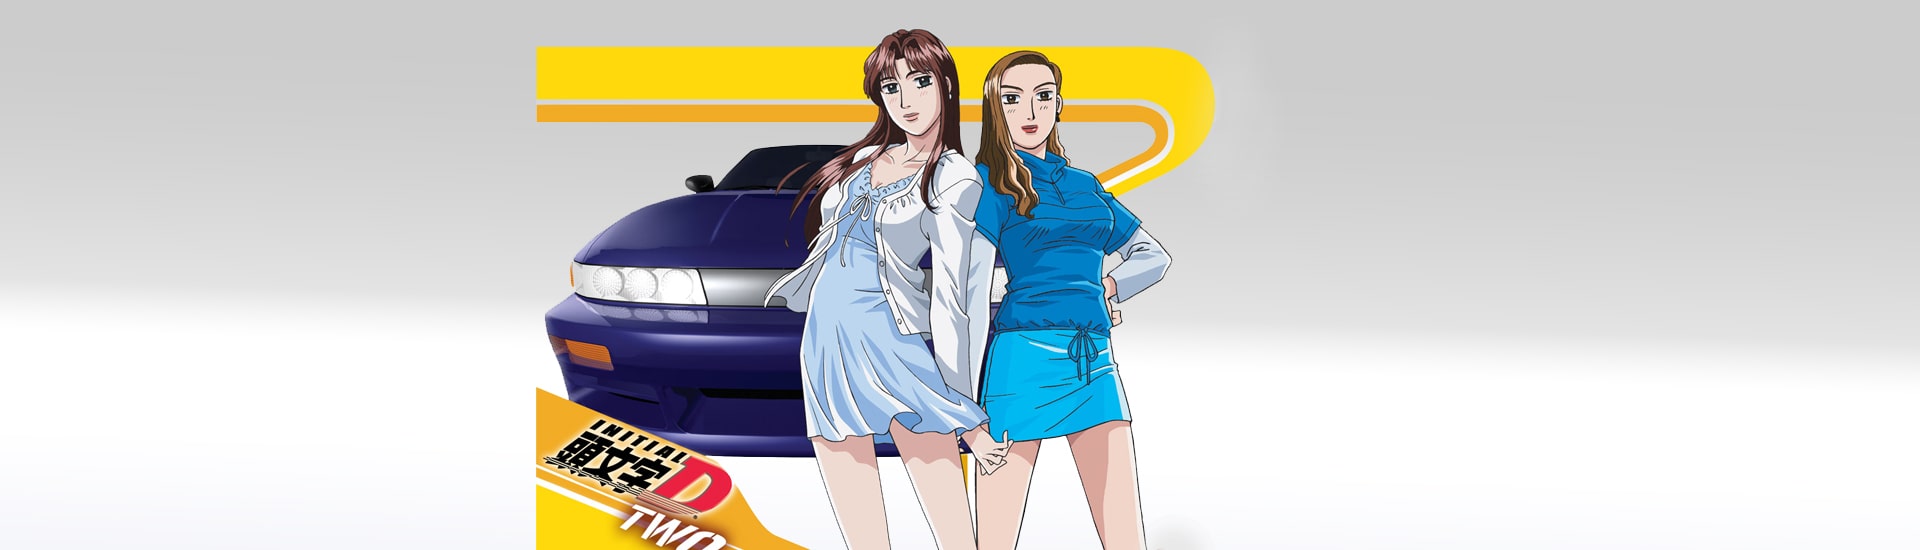 Initial D Extra Stage 2 - Animes Online